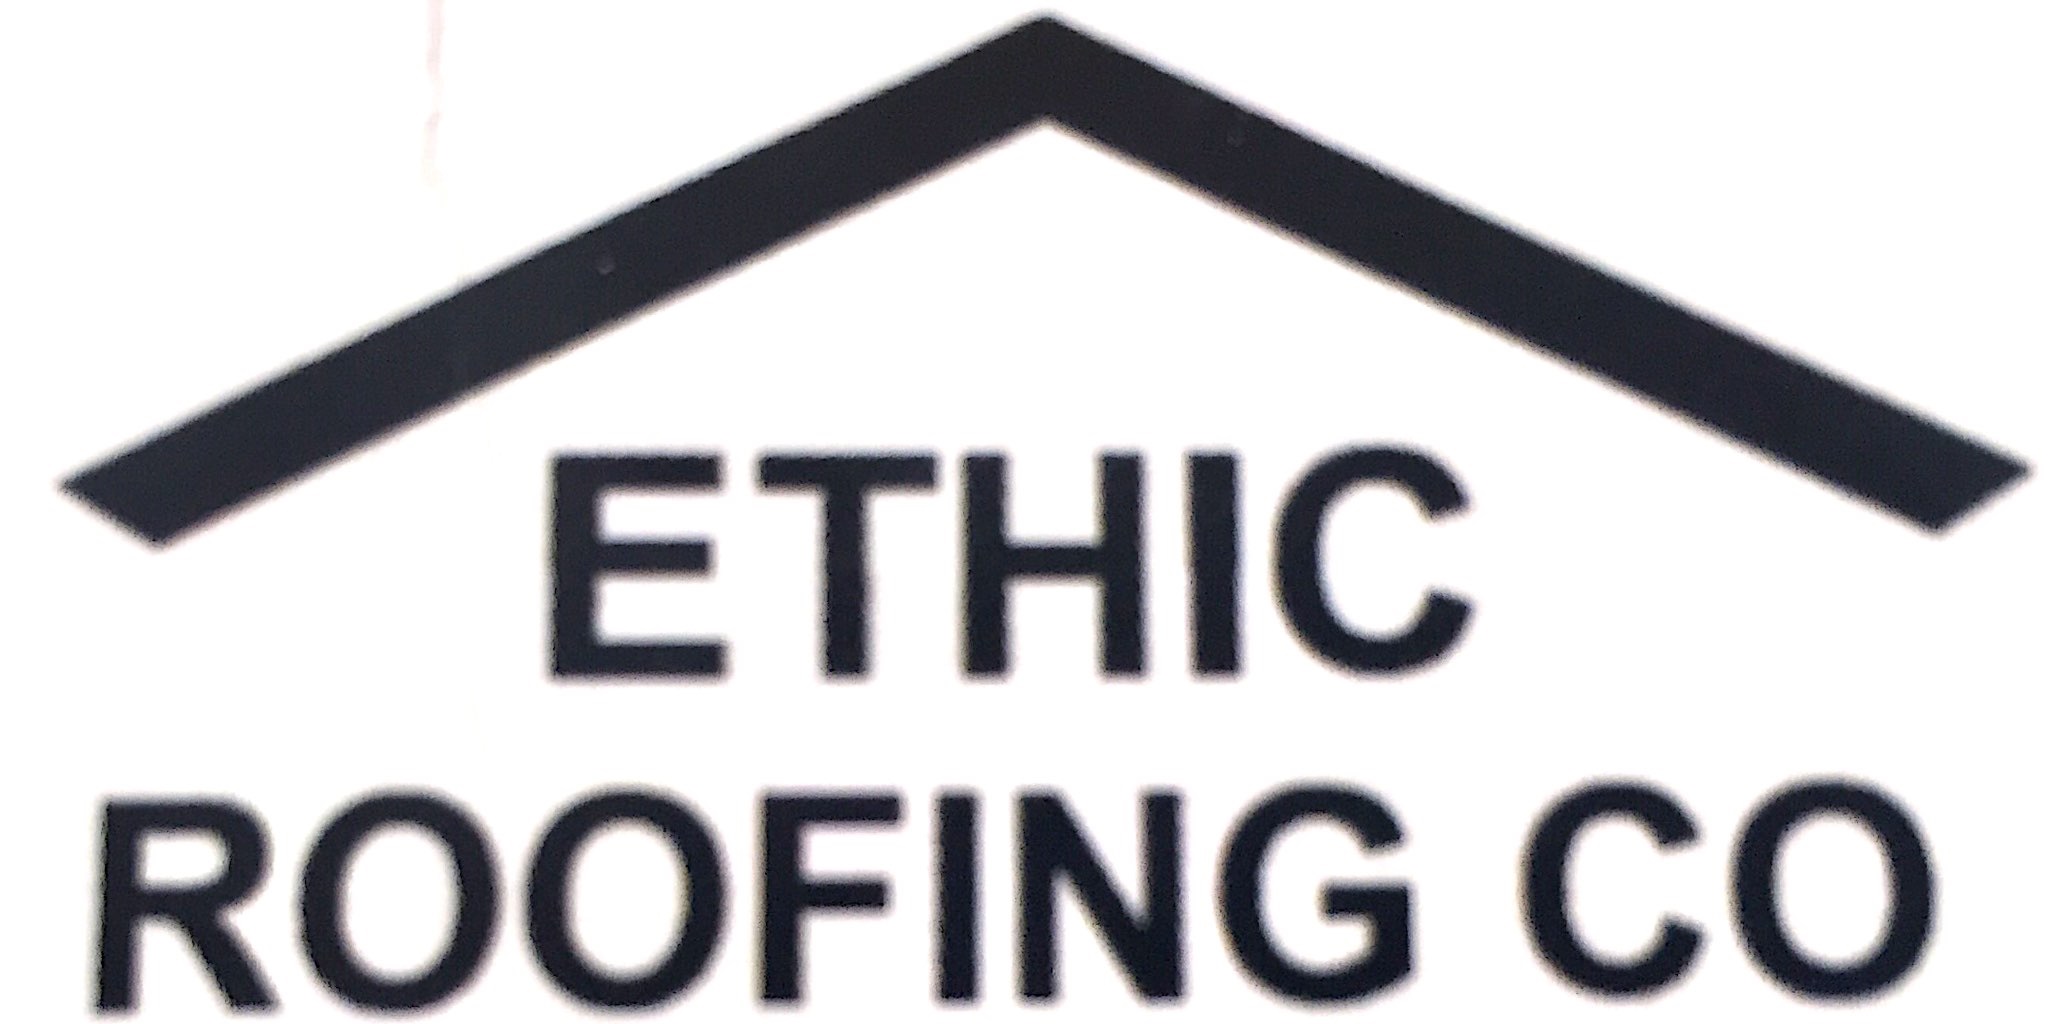 Ethic Roofing